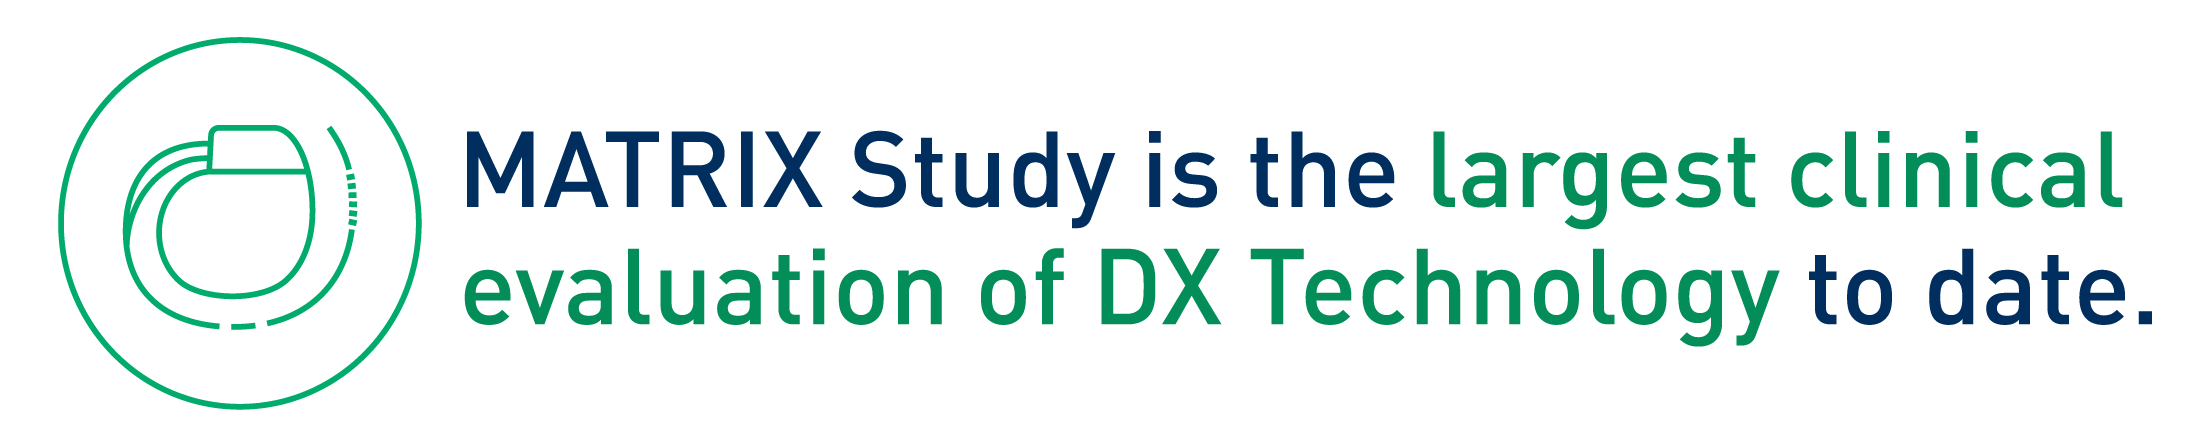 MATRIX Study is the largest clinical evaluation of DX Technology to date.